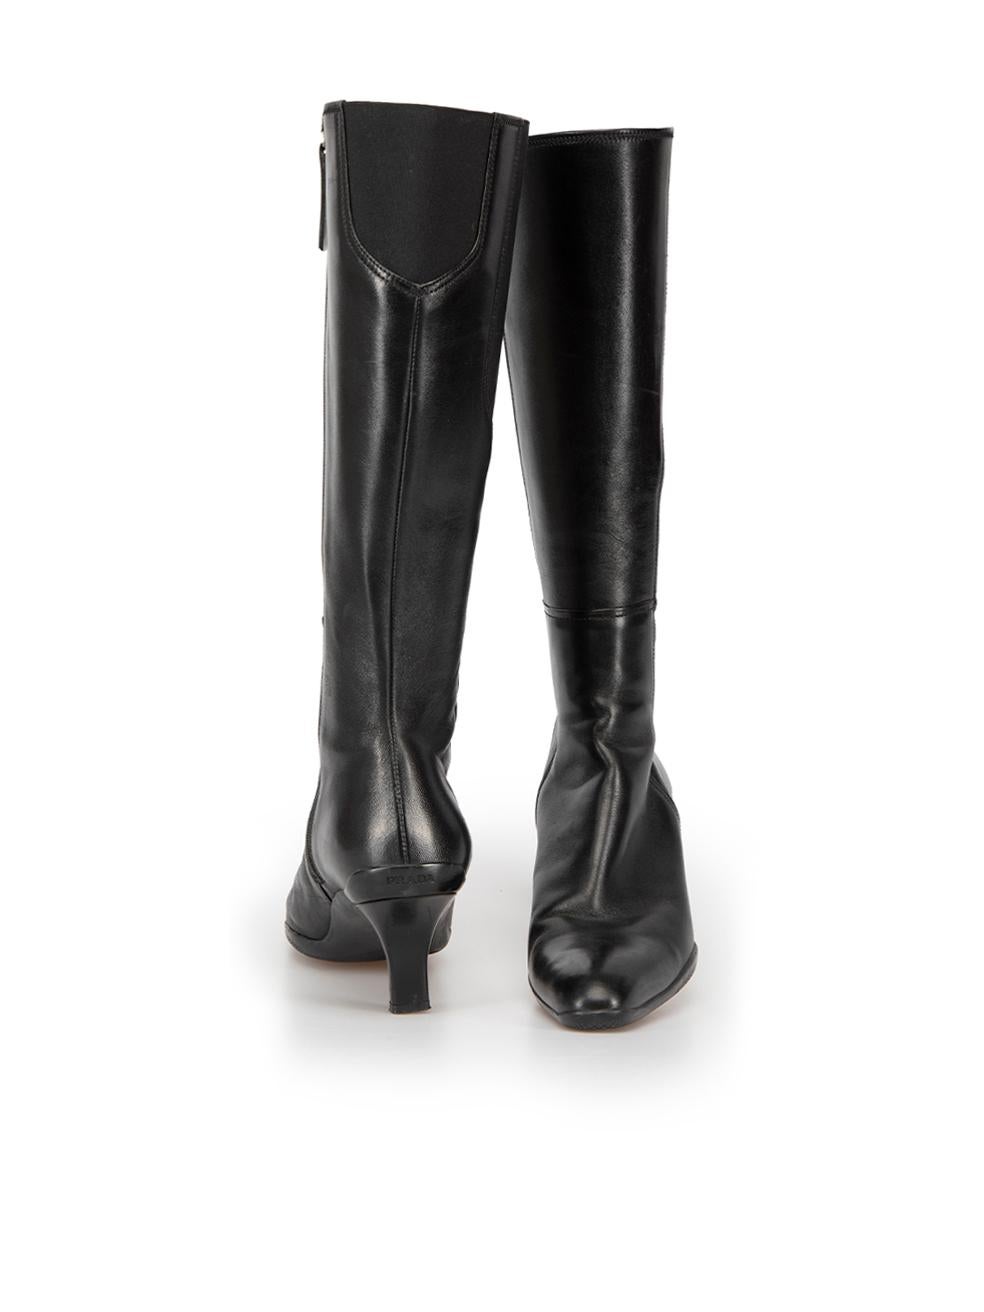 Prada Sport Vintage Black Leather Knee High Boots Size IT 36 In Good Condition For Sale In London, GB